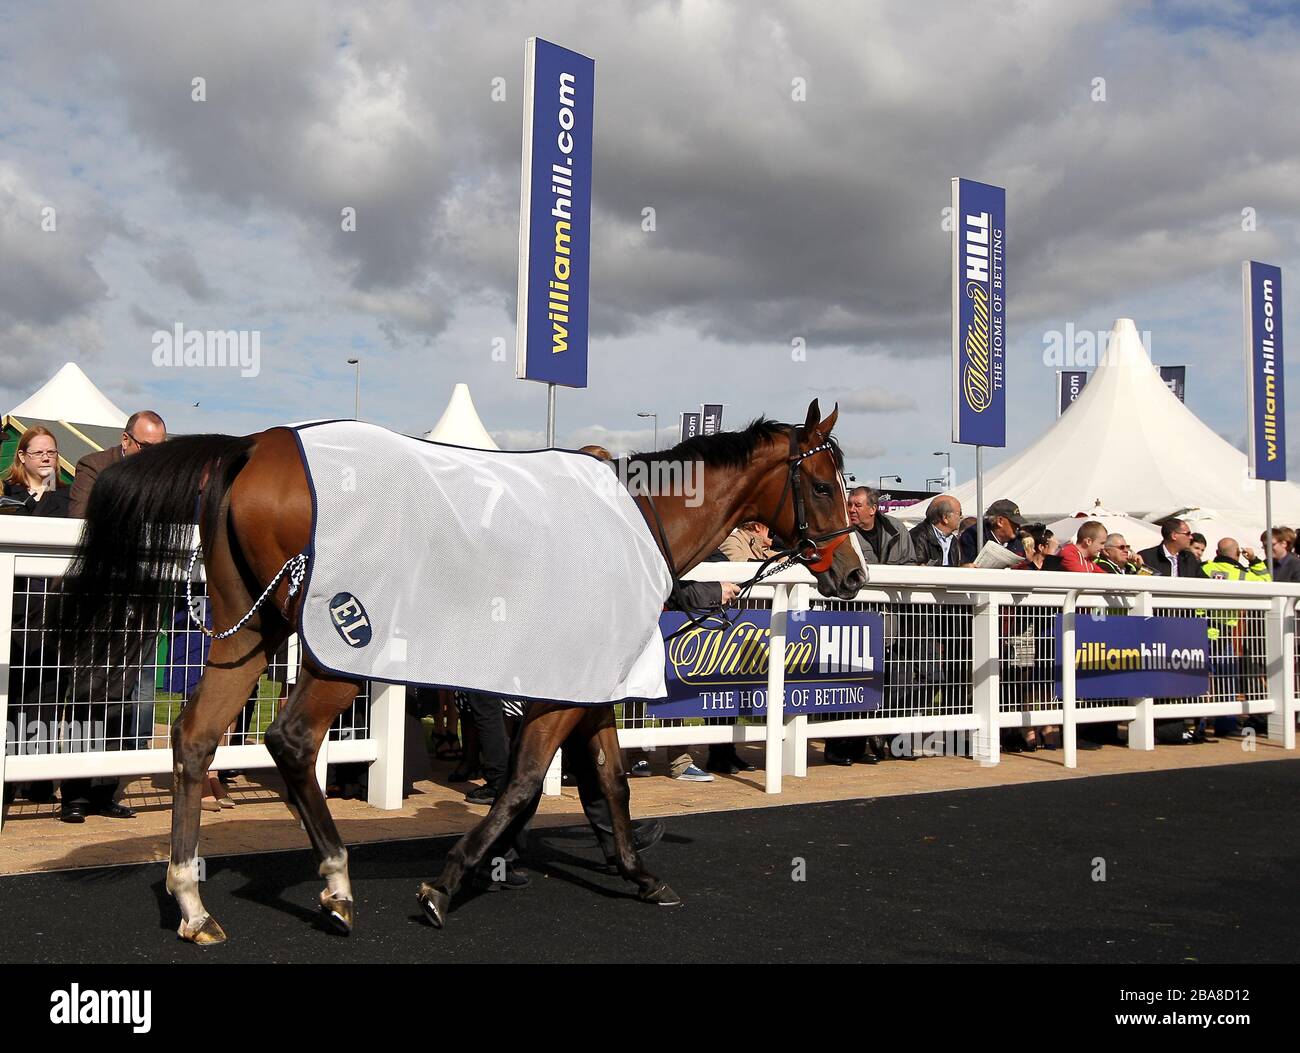 William Hill branding and signage at Ayr Racecourse Stock Photo